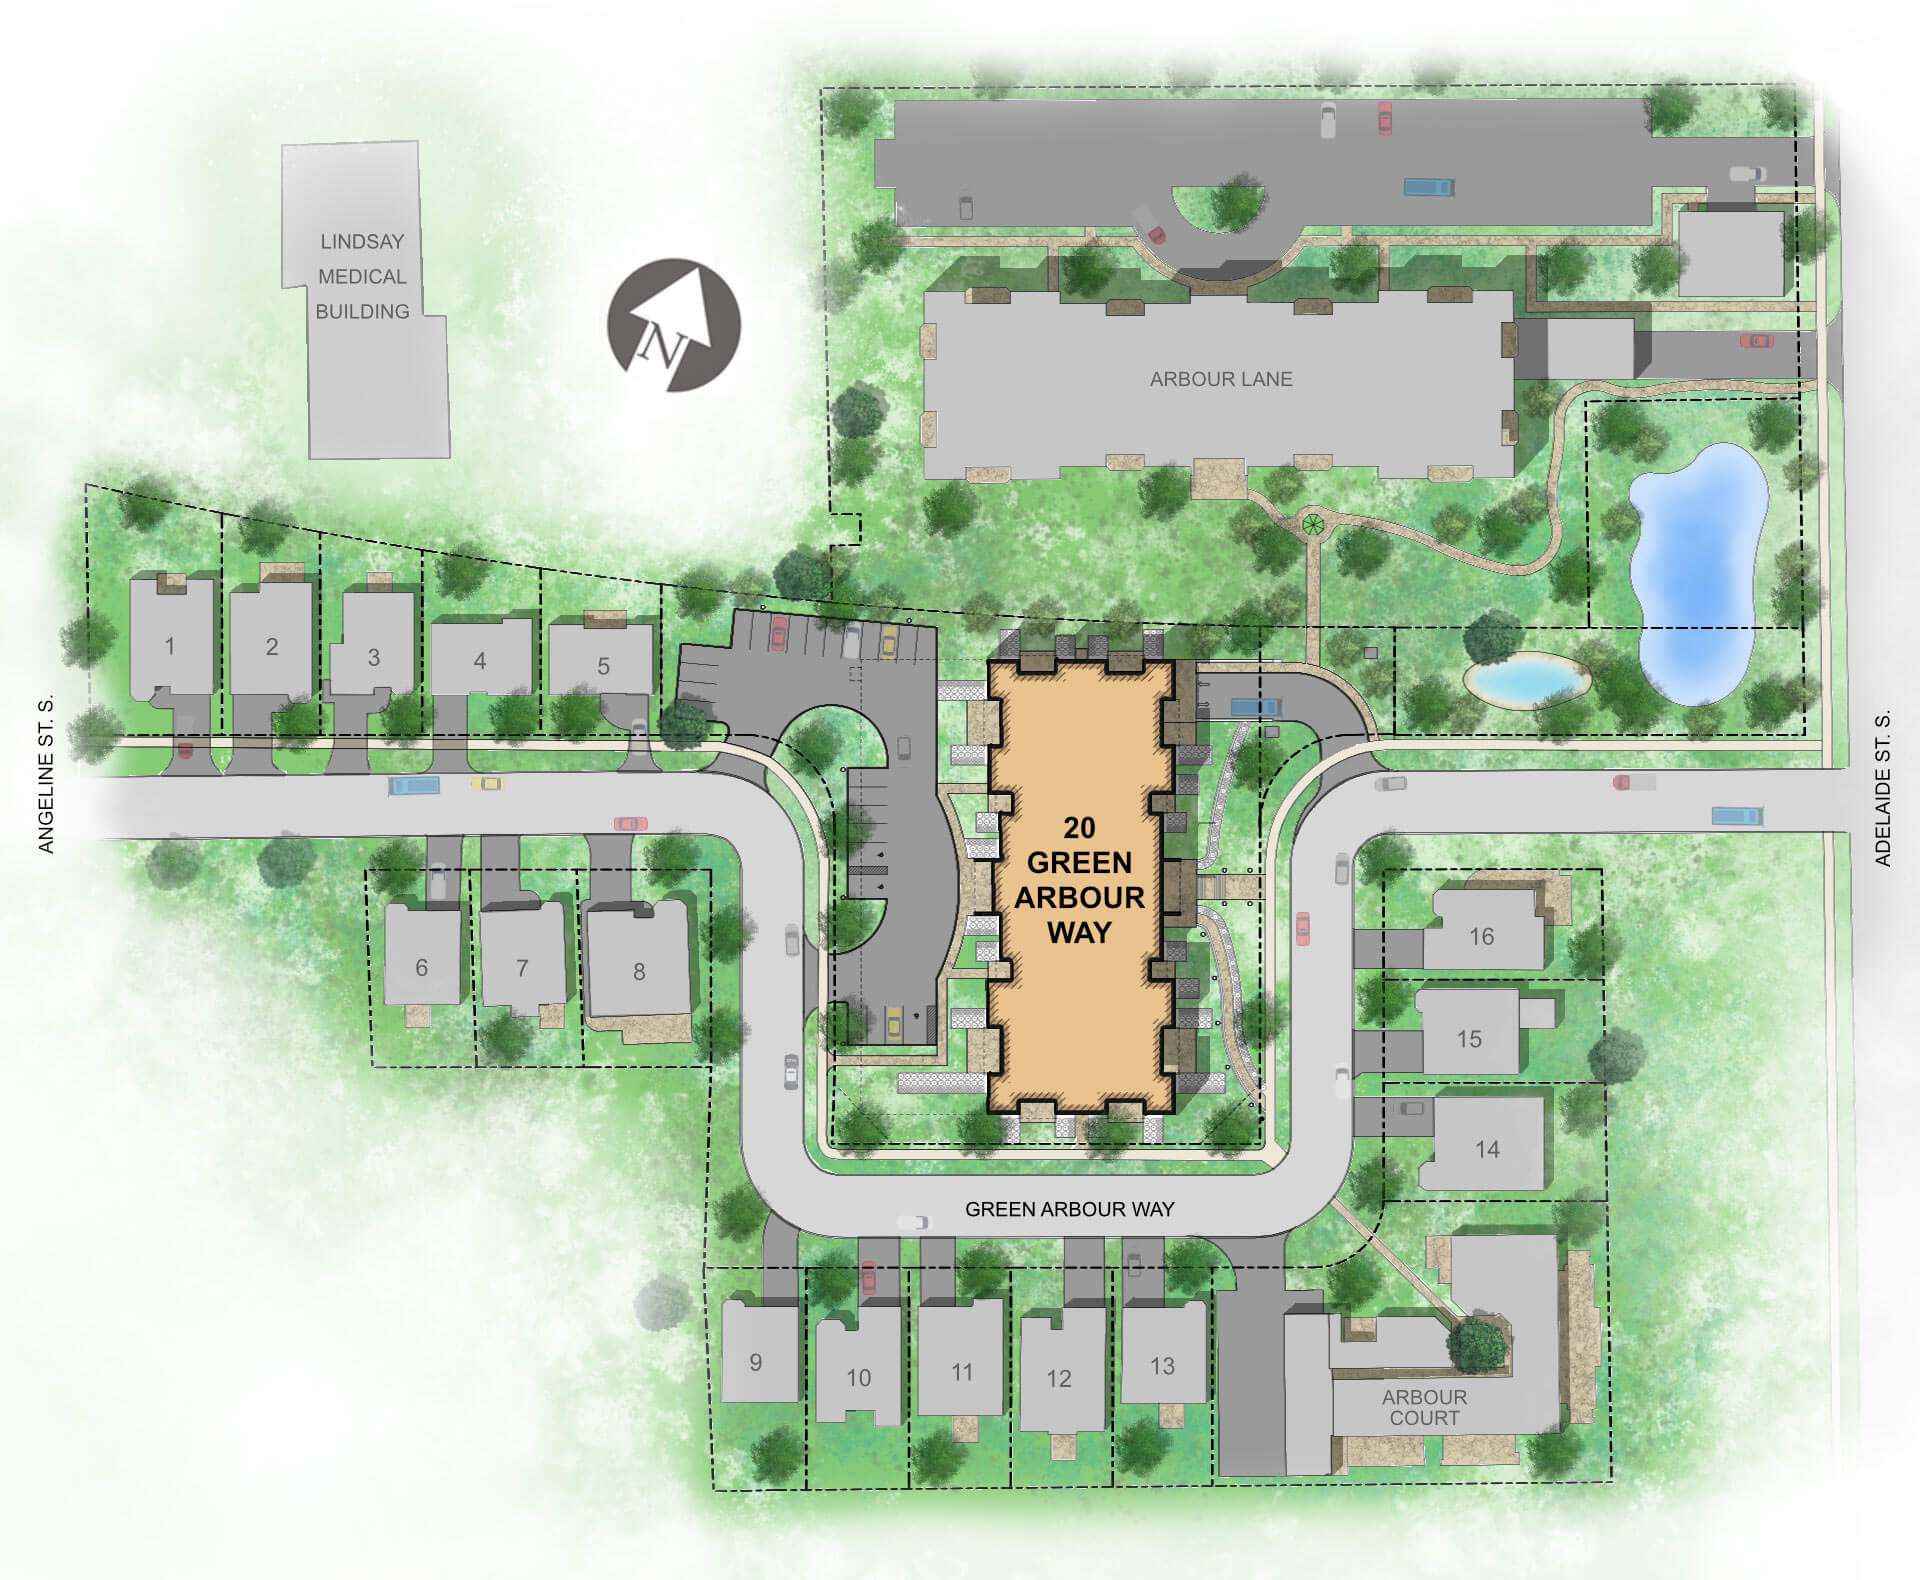 Arbour Village site plan showing individual Arbour homes, Arbour Court, 20 Green Arbour Way, and a planned north building named Arbour Lane